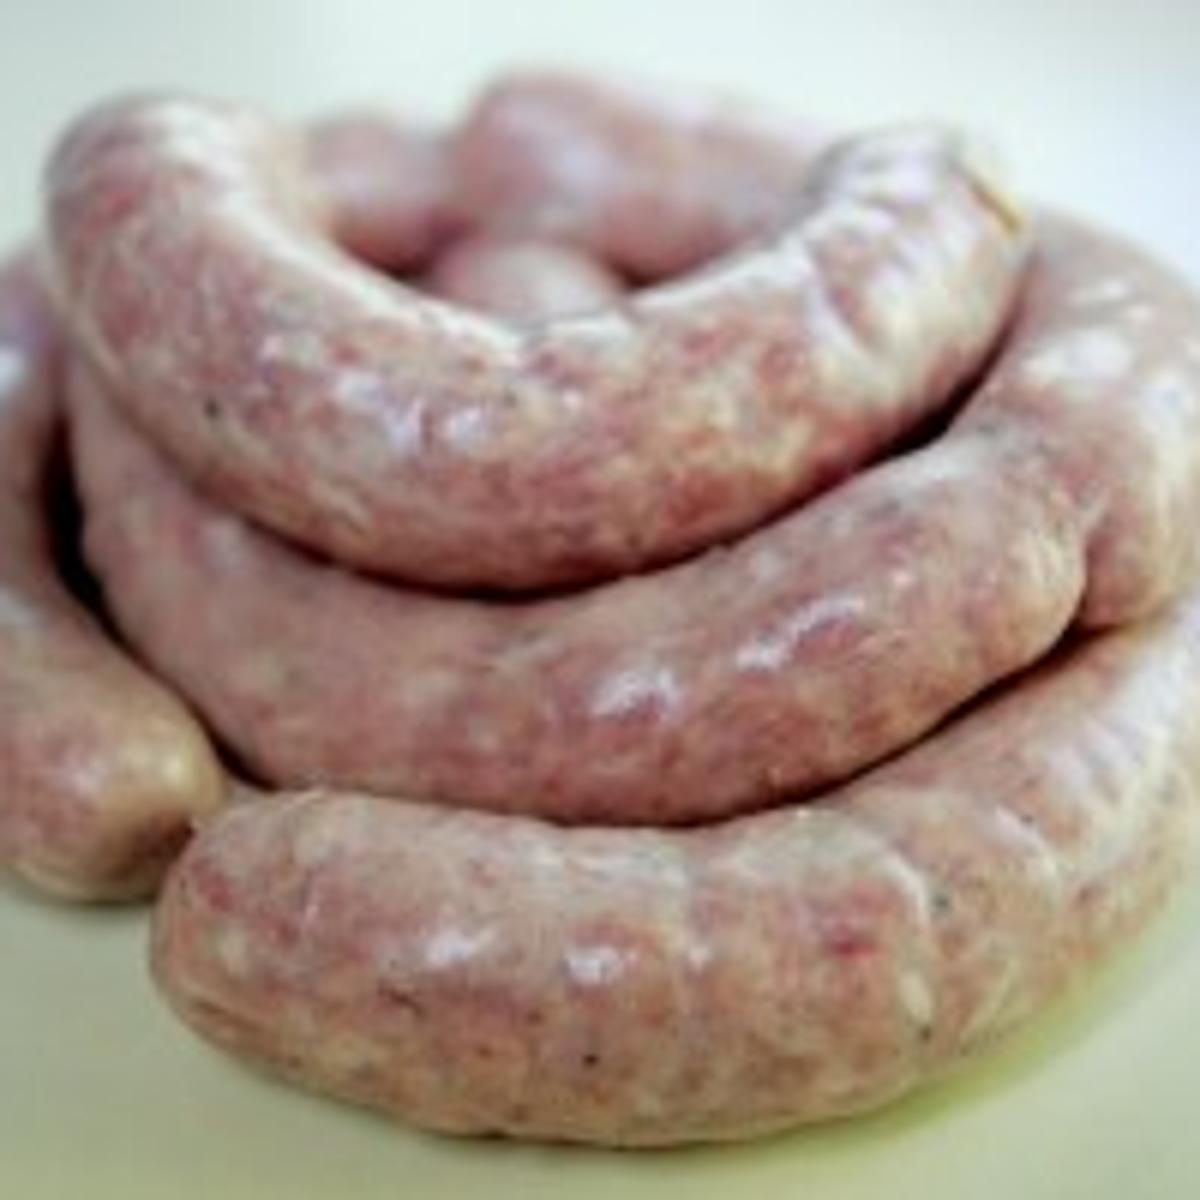 Homemade sausage is a preservative-free